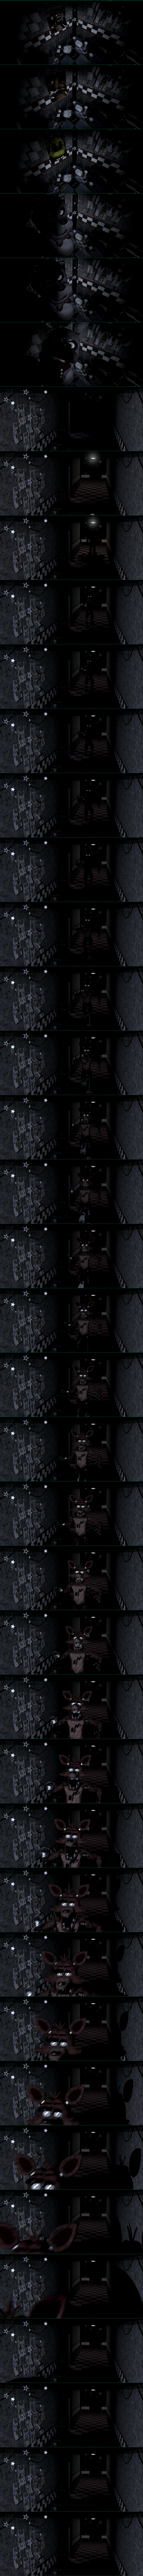 Five Nights at Freddy's - West Hall